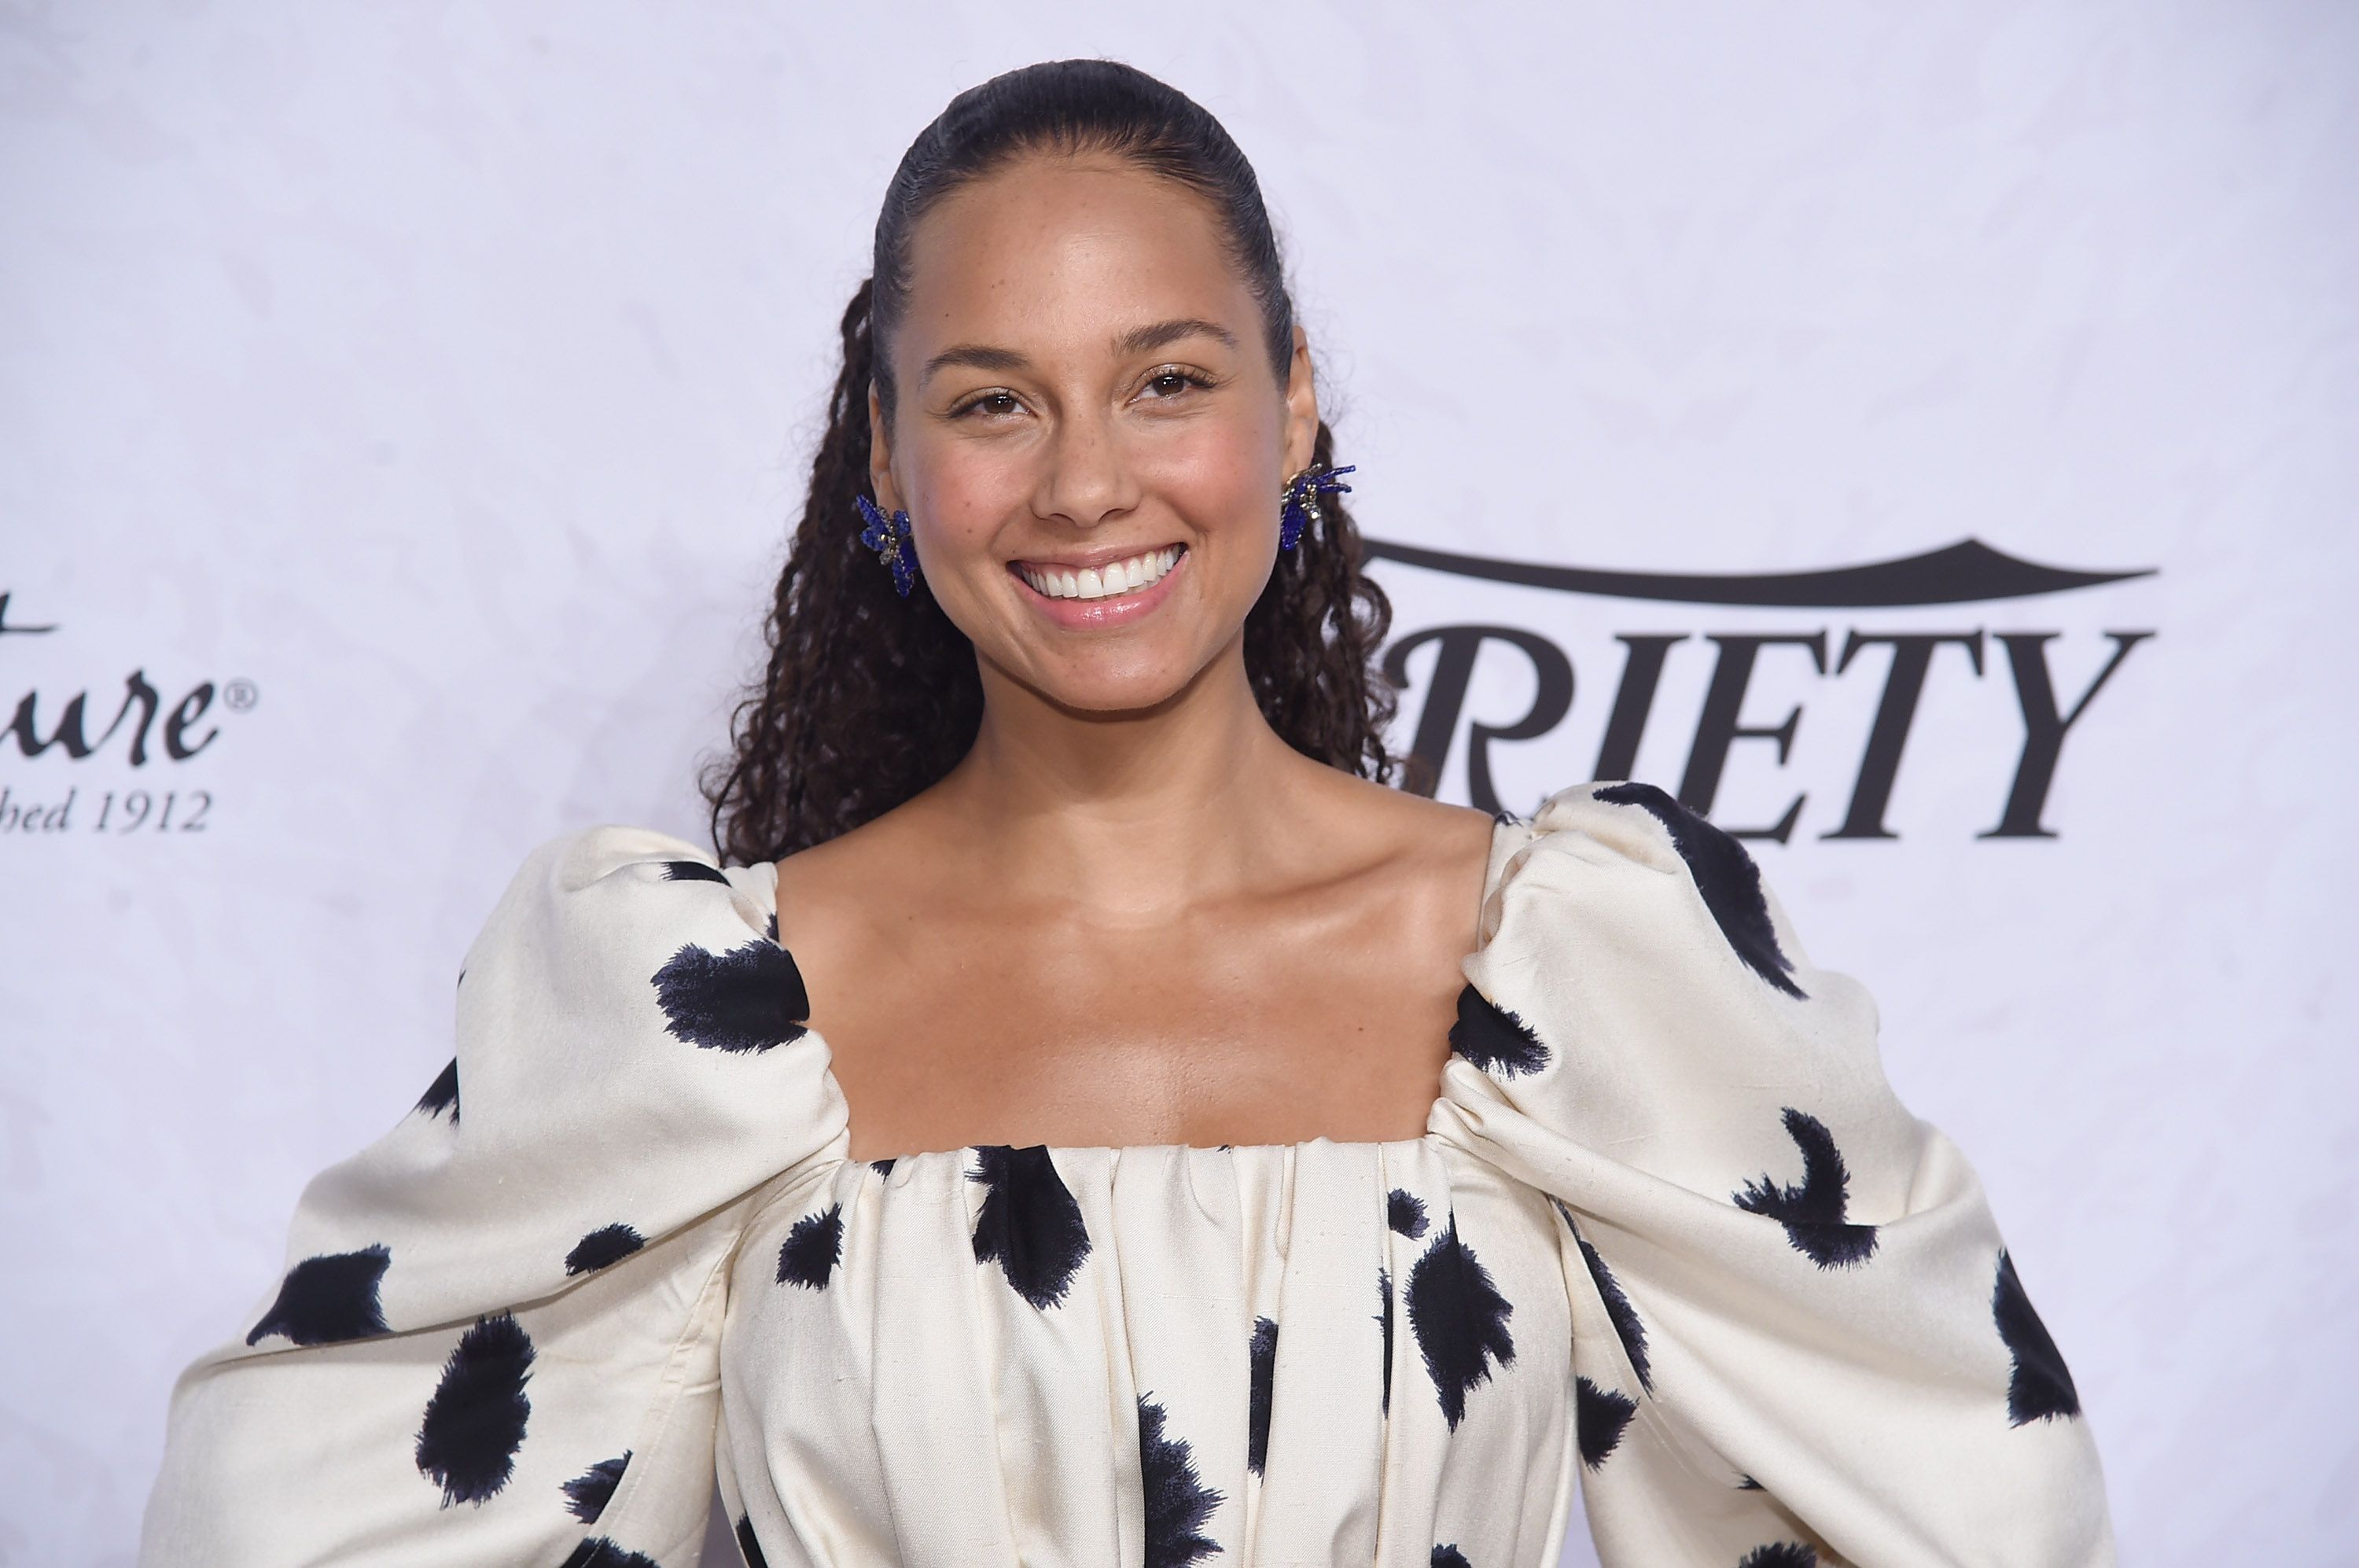 Alicia Keys at Variety's "Power of Women: New York" at Cipriani Wall Street on April 13, 2018 | Photo: Getty Images